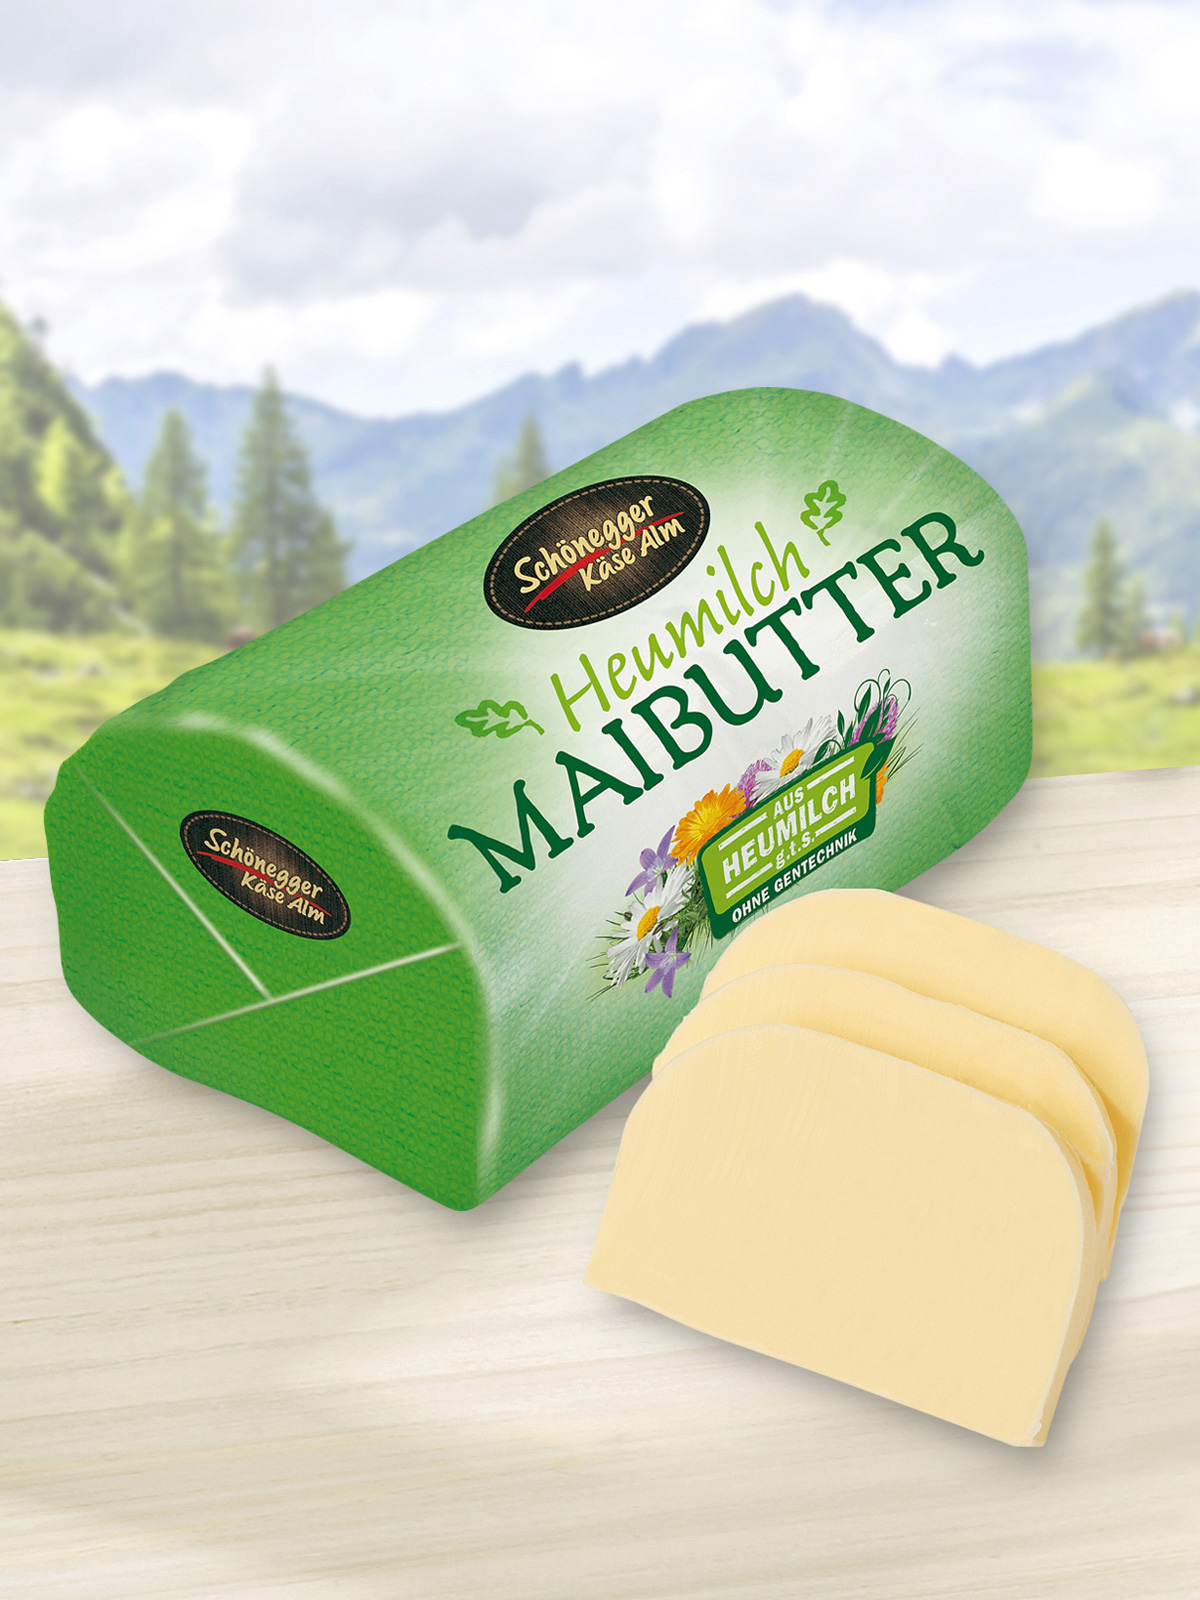 Heumilch Almbutter  